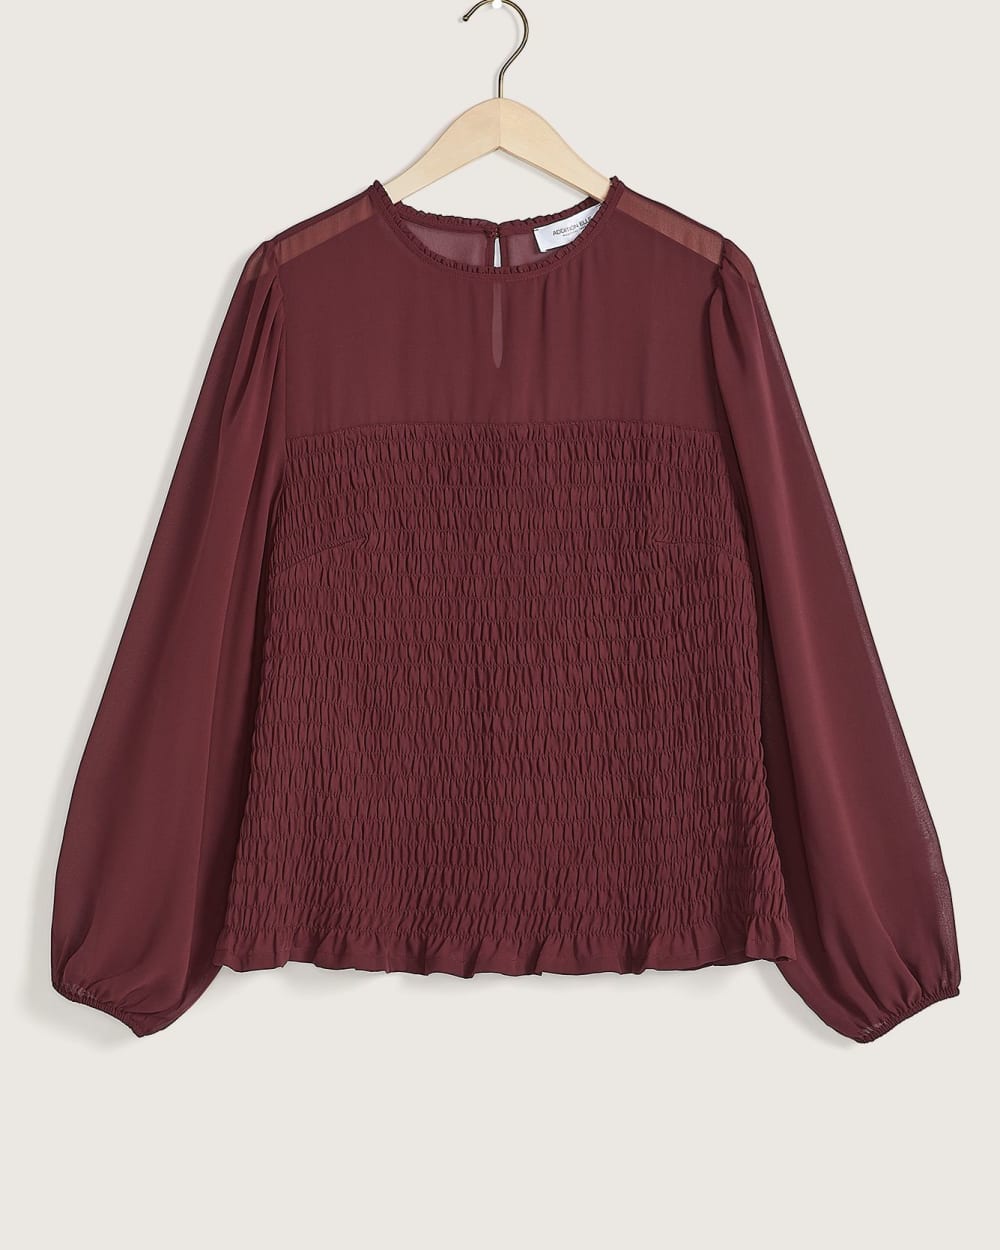 Responsible, Long-Sleeve Blouse with Smocking - Addition Elle